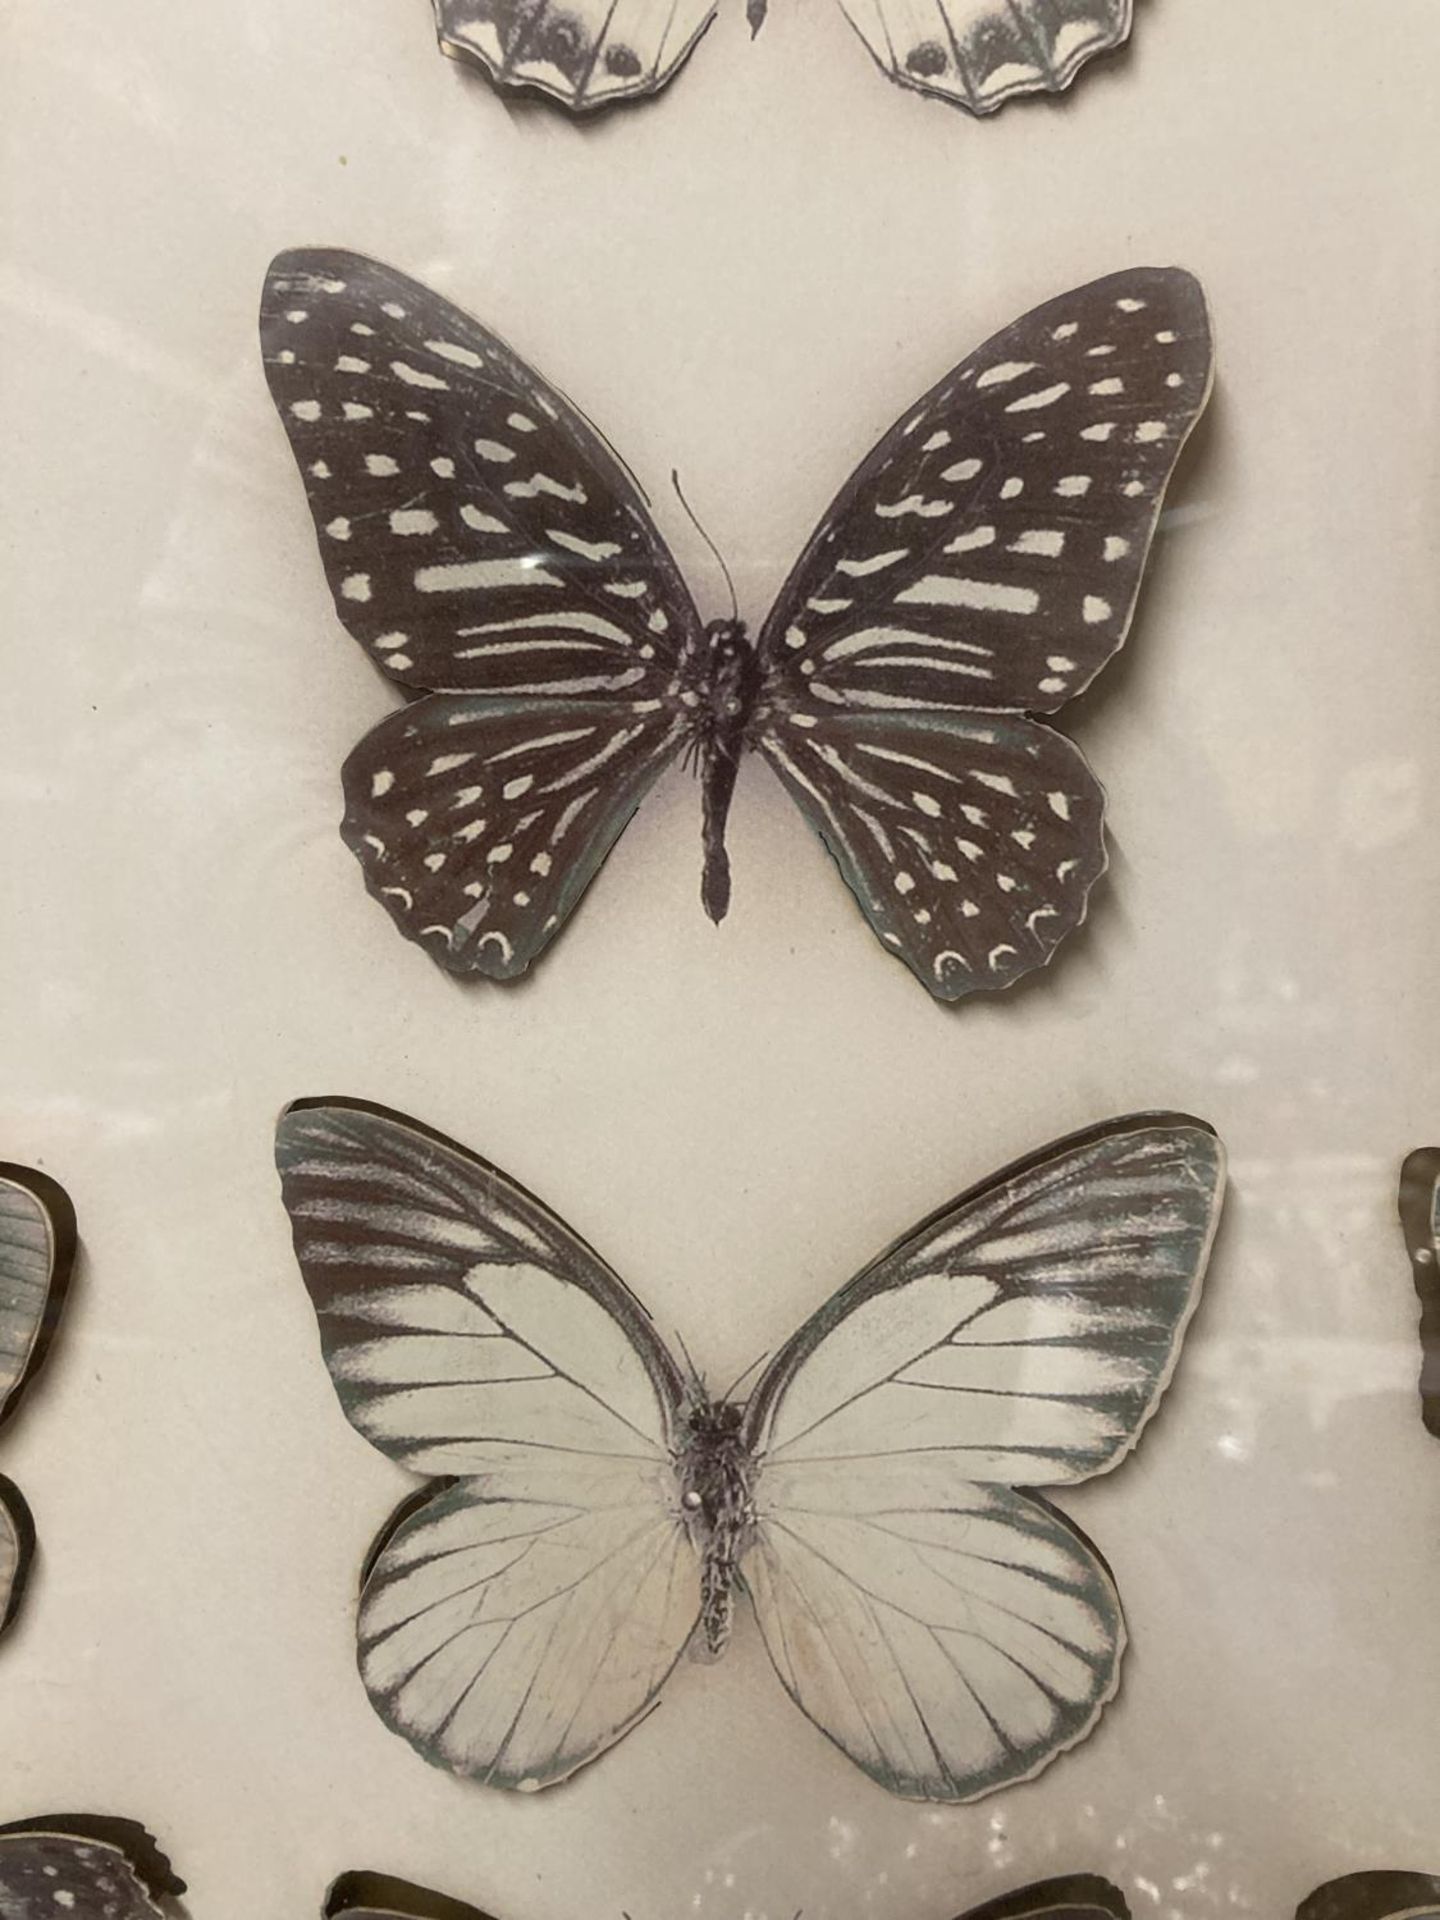 A WALL MOUNTED CASE CONTAINING 3-D CARDBOARD BUTTERFLIES - Image 2 of 4